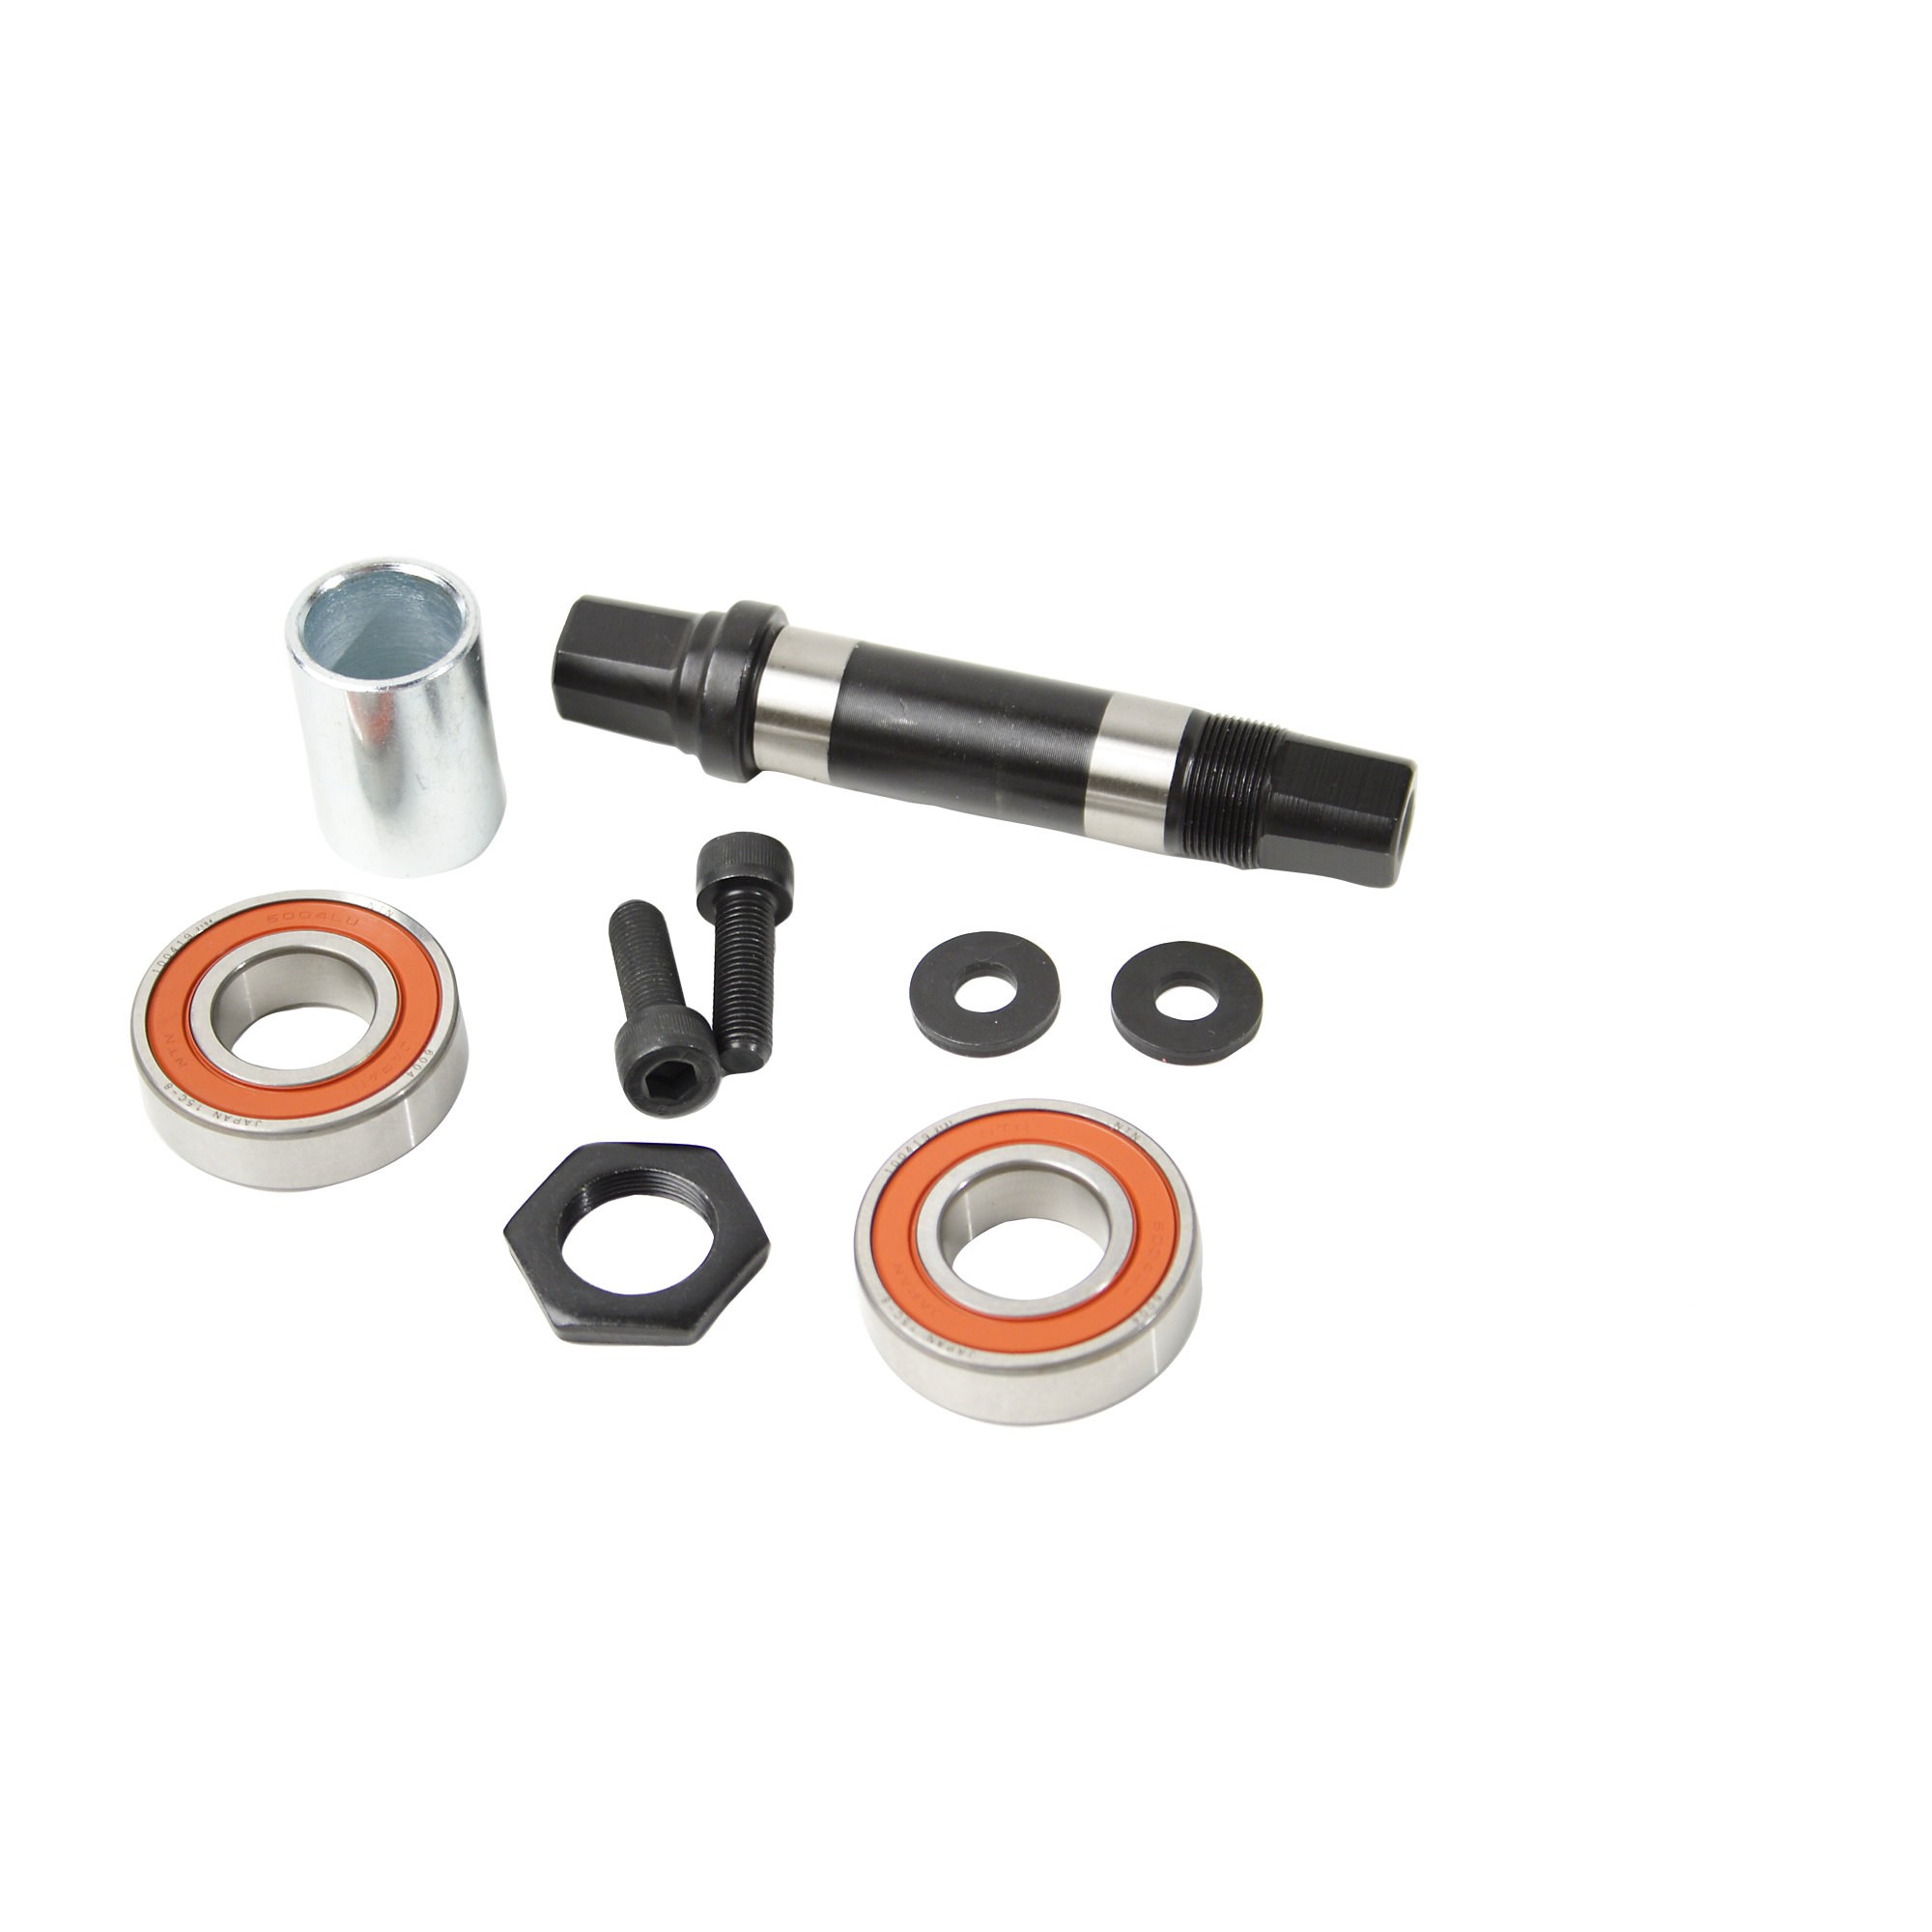 Bottom Bracket Kit fits Certain Star Trac Indoor Cycles | OEM